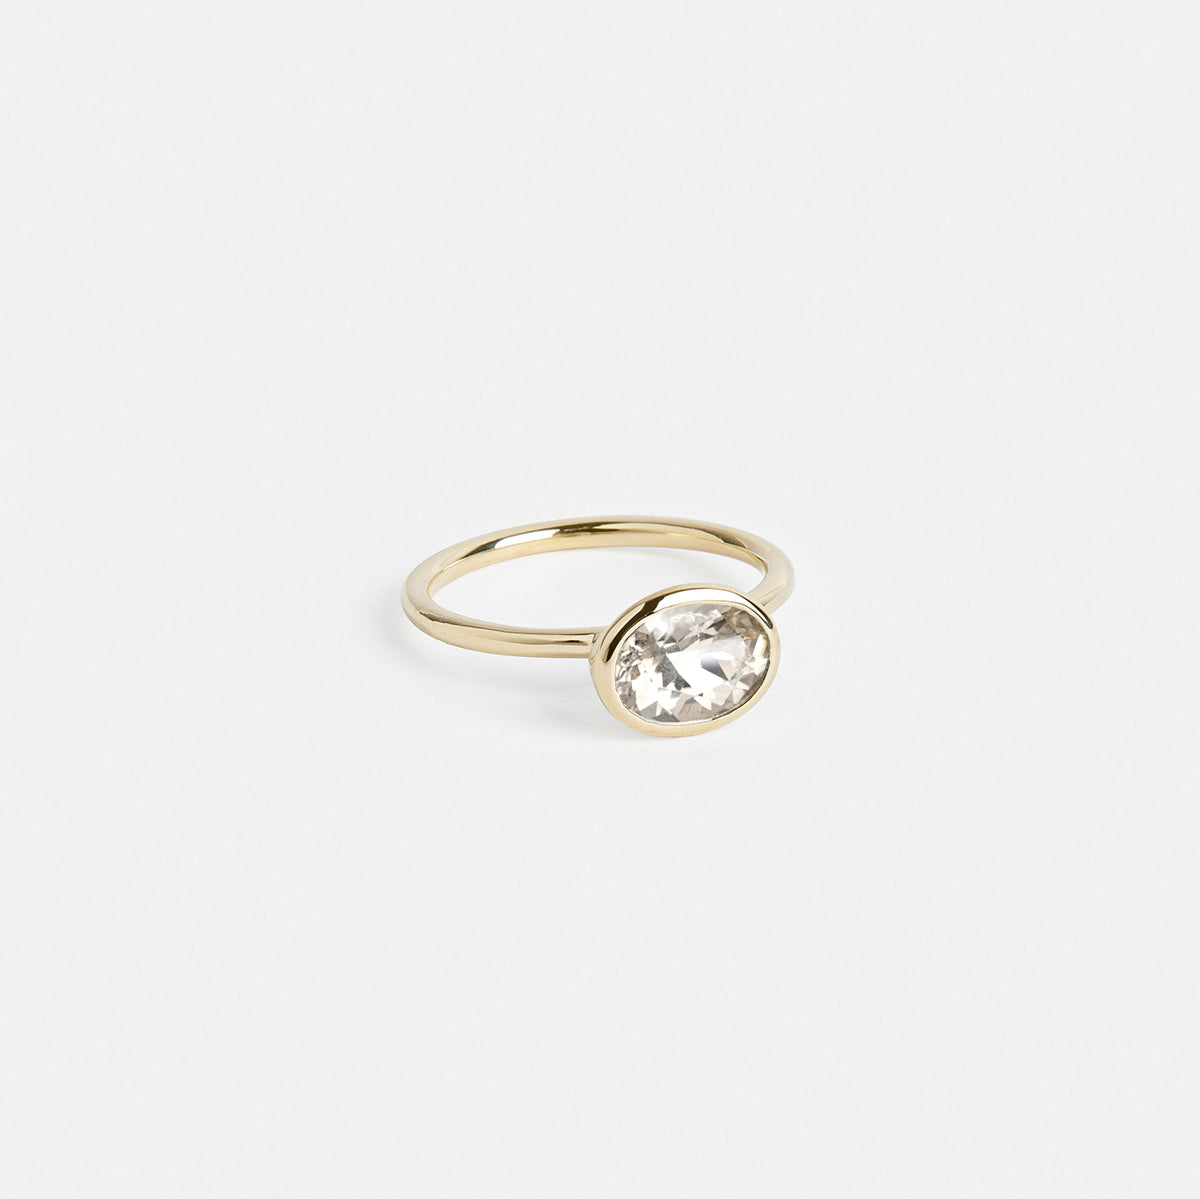 Lida Thin Ring in 14k Gold set with an oval brilliant cut lab-grown diamond By SHW Fine Jewelry NYC